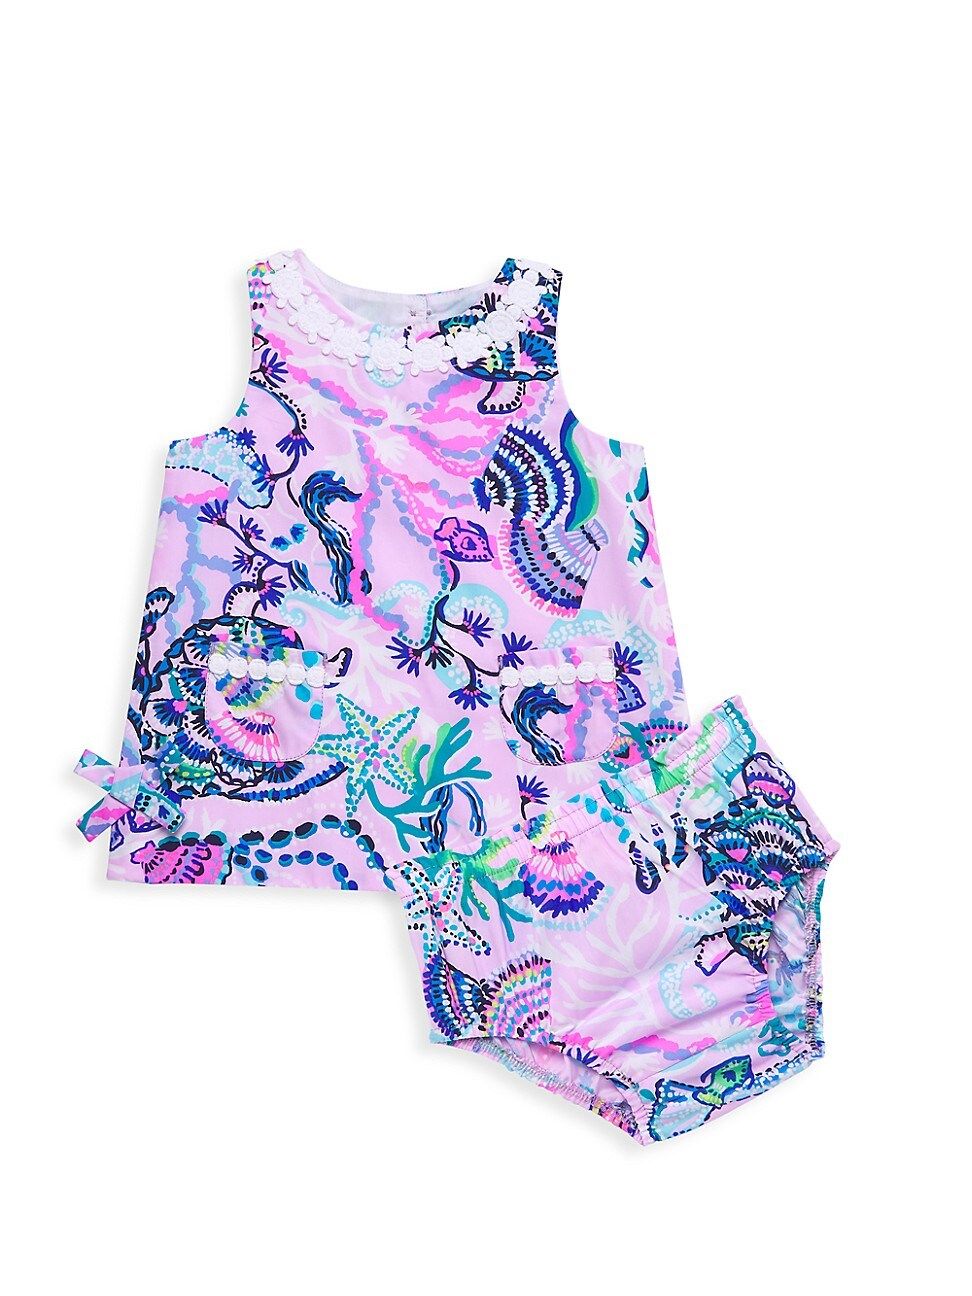 Lilly Pulitzer Kids Baby Girl's 2-Piece Shift Dress & Bloomers Set | Saks Fifth Avenue